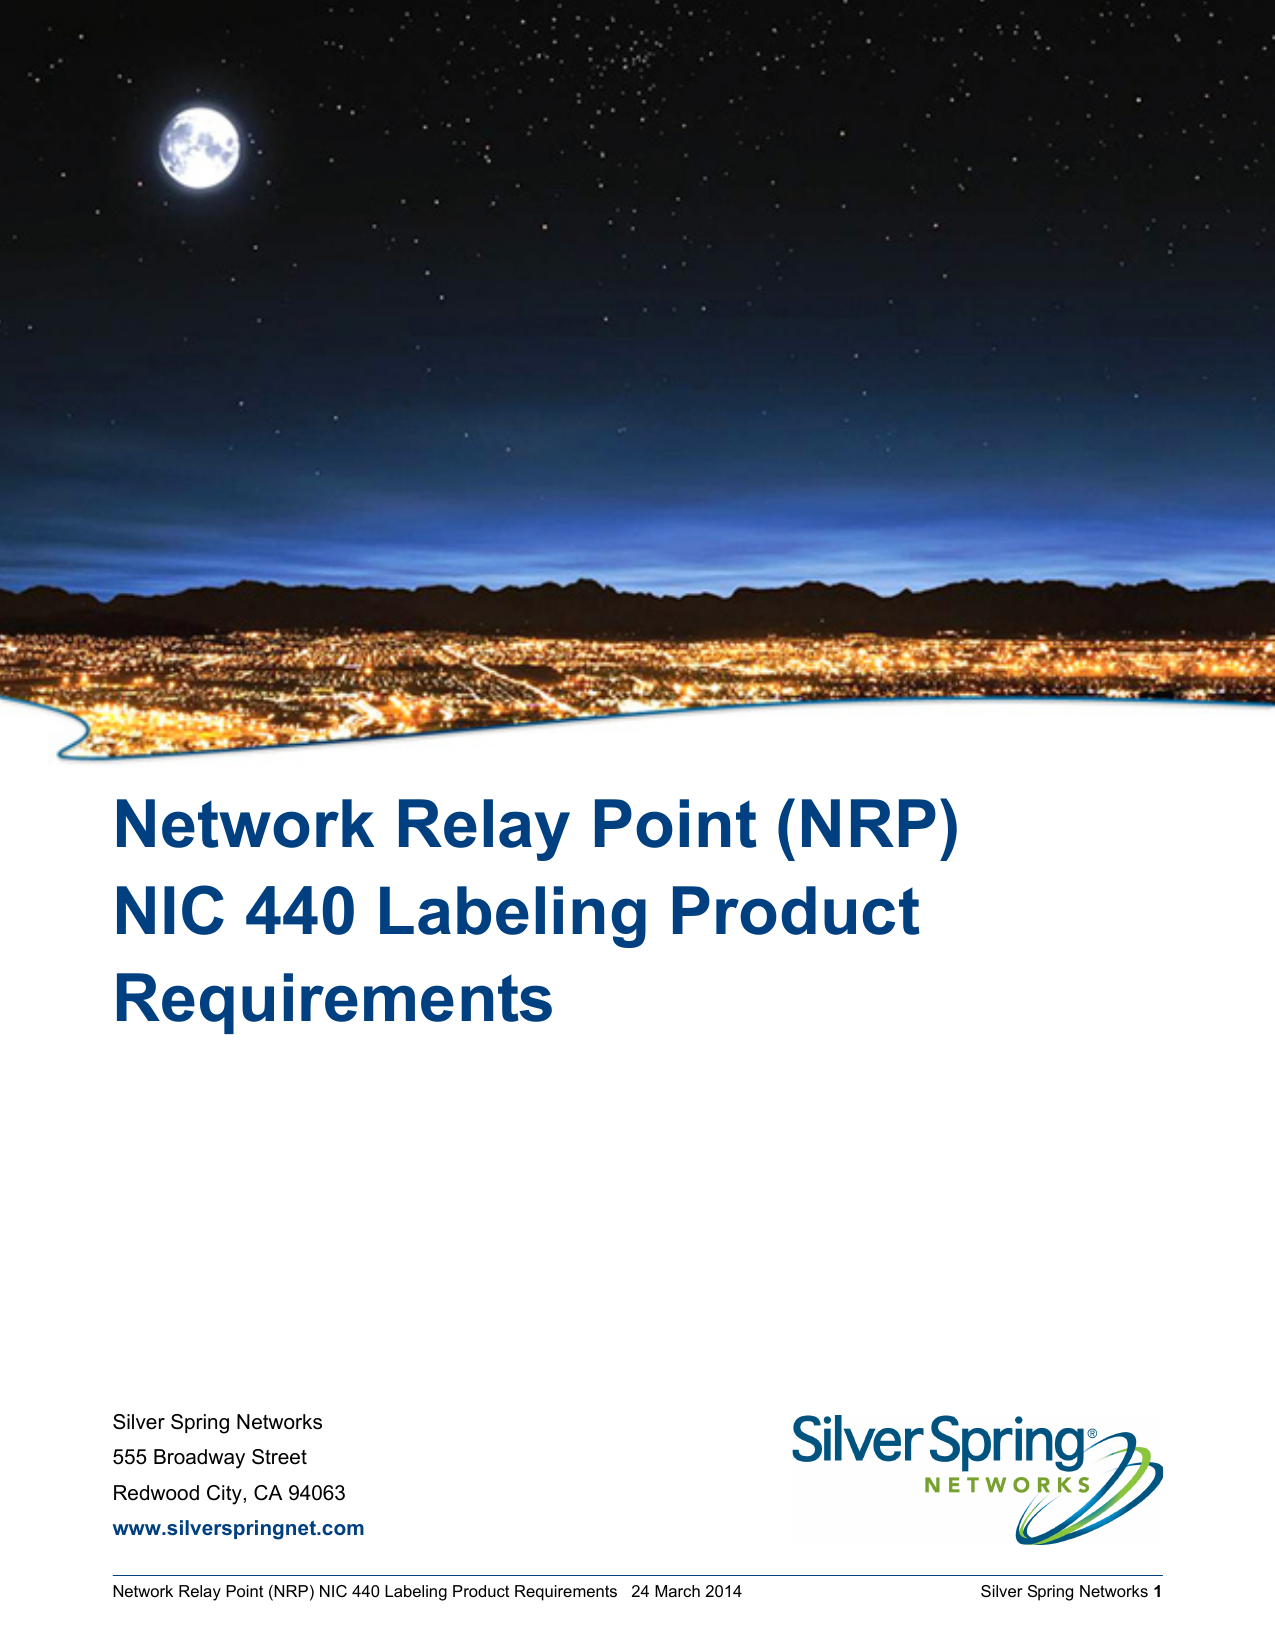 Silver Spring Networks555 Broadway StreetRedwood City, CA 94063www.silverspringnet.comNetwork Relay Point (NRP) NIC 440 Labeling Product Requirements   24 March 2014    Silver Spring Networks 1Network Relay Point (NRP) NIC 440 Labeling Product Requirements